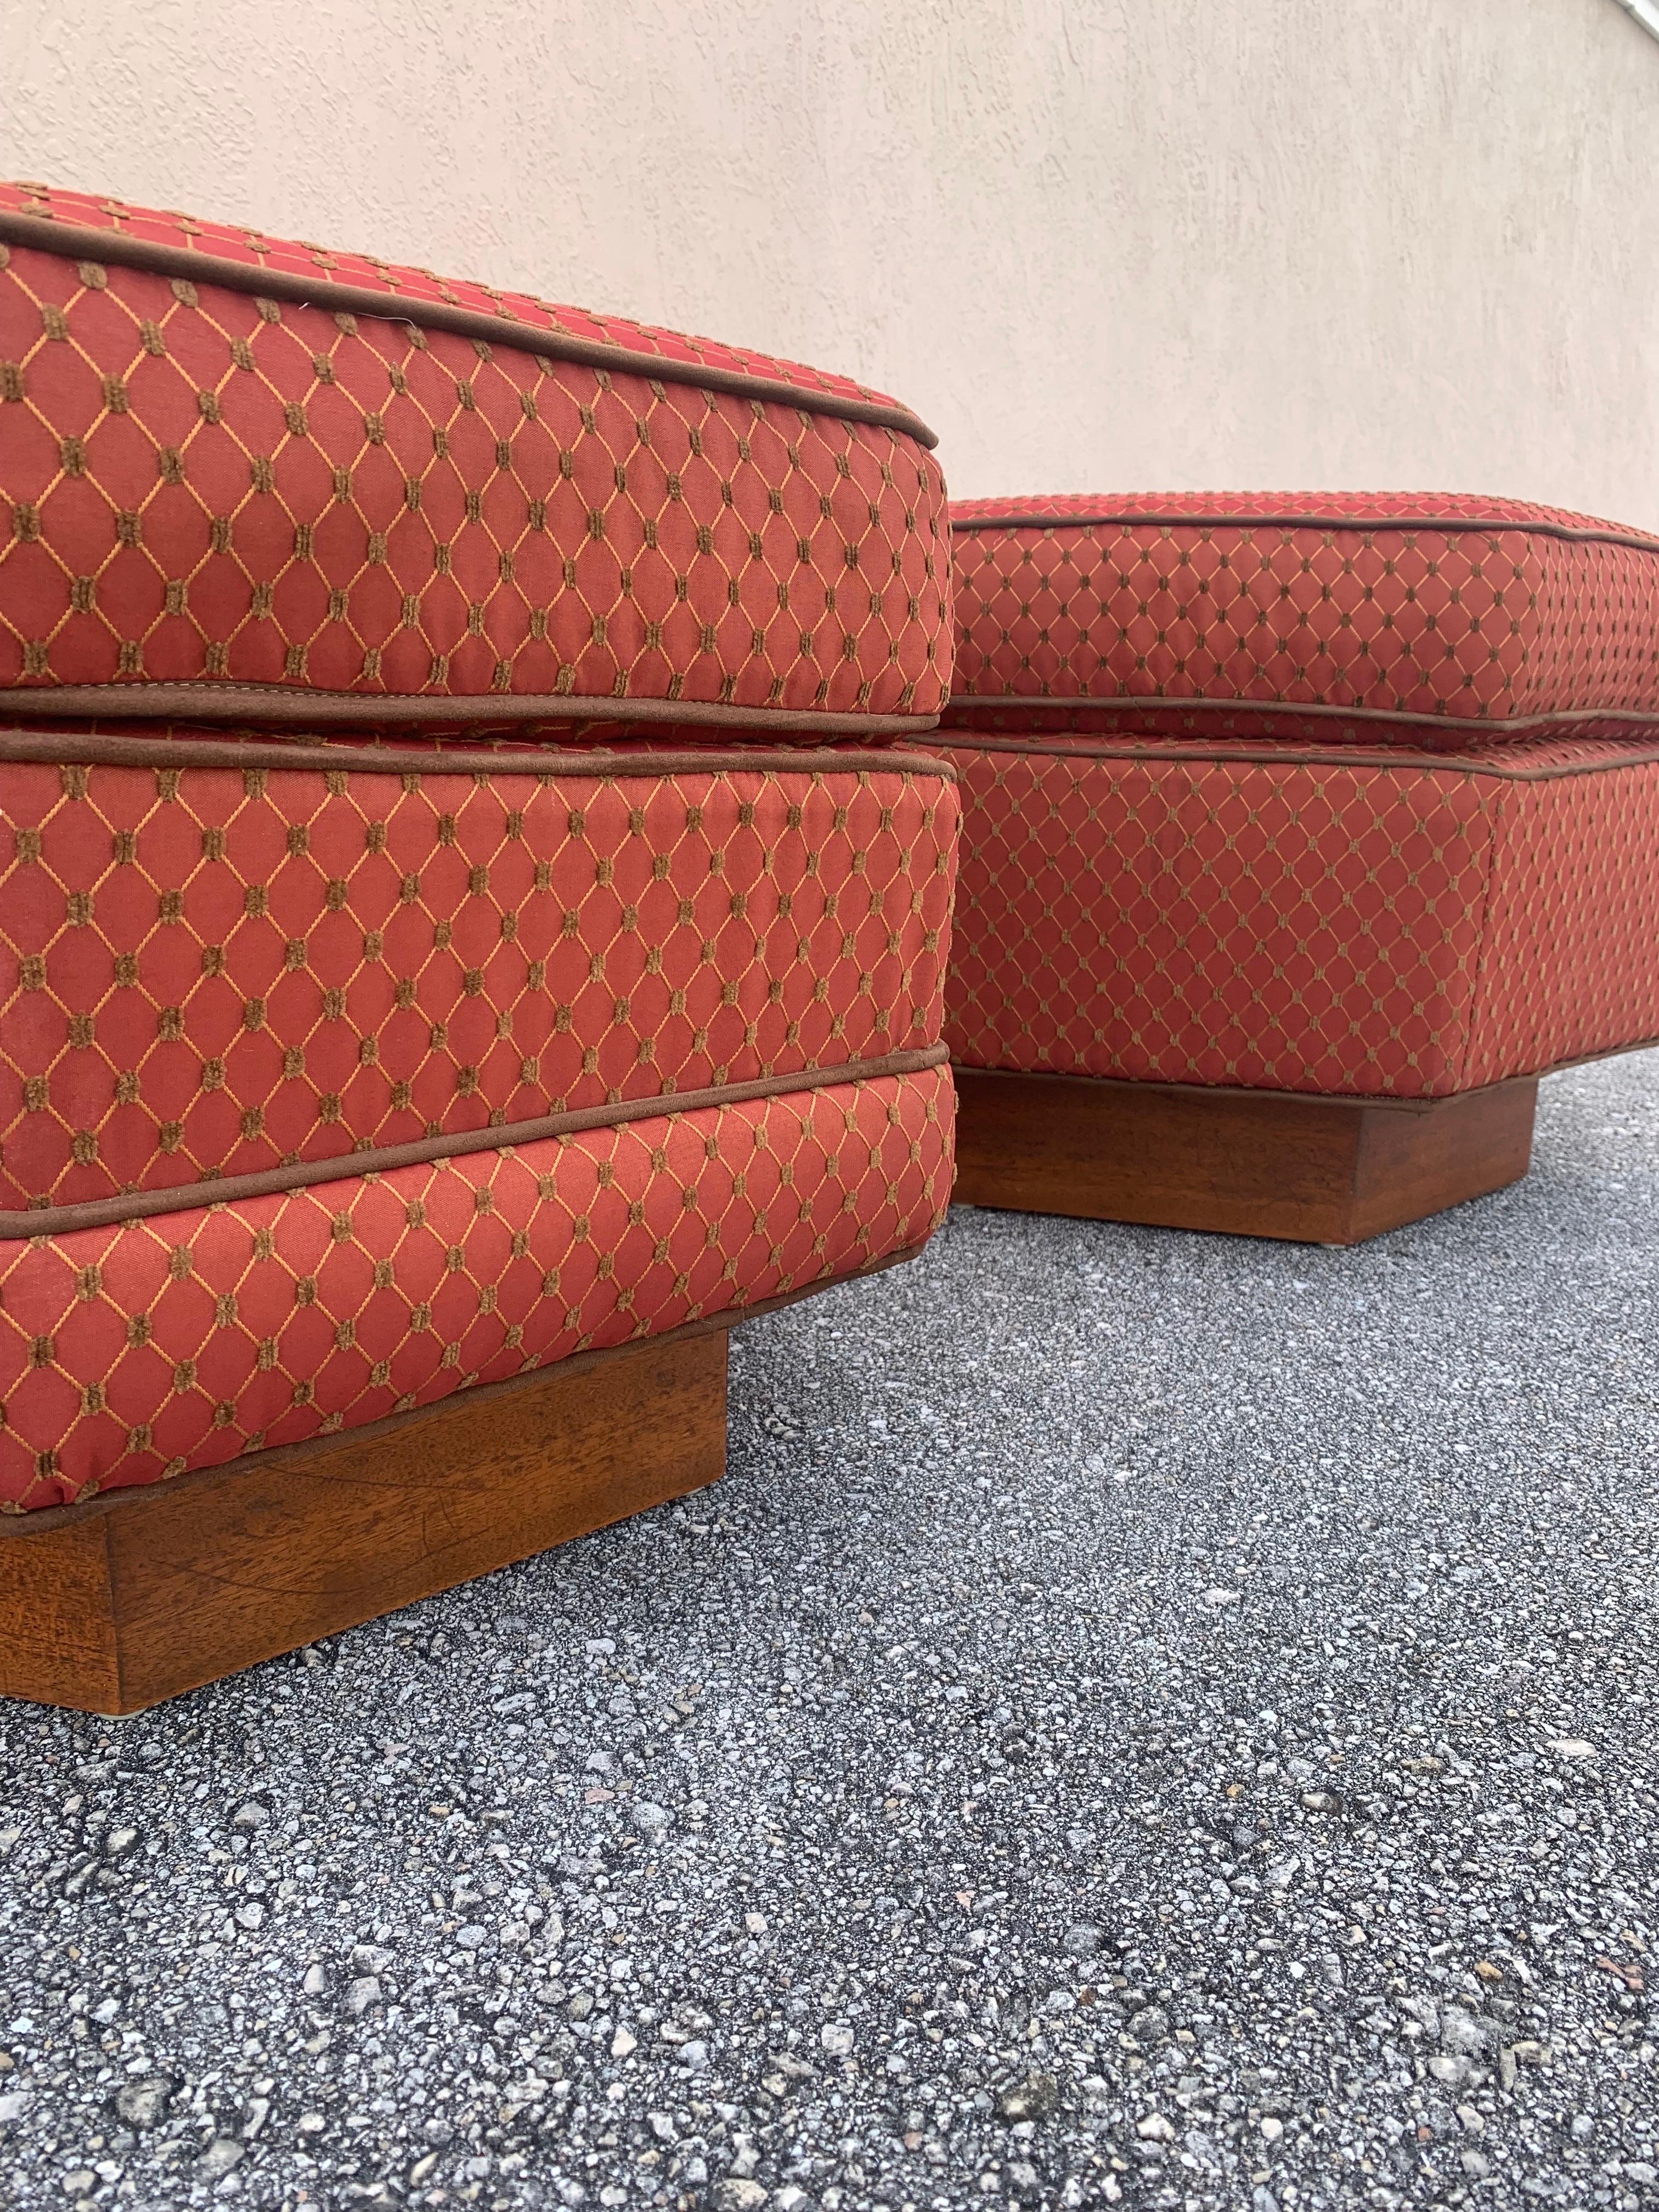 A pair of Mid Century Modern ottomans. 

These ottomans were custom made for a house in New Jersey that was designed by a student of Frank Lloyd Wright that was recently featured in an episode of the Marvelous Mrs Maisel. Owners were adamant that